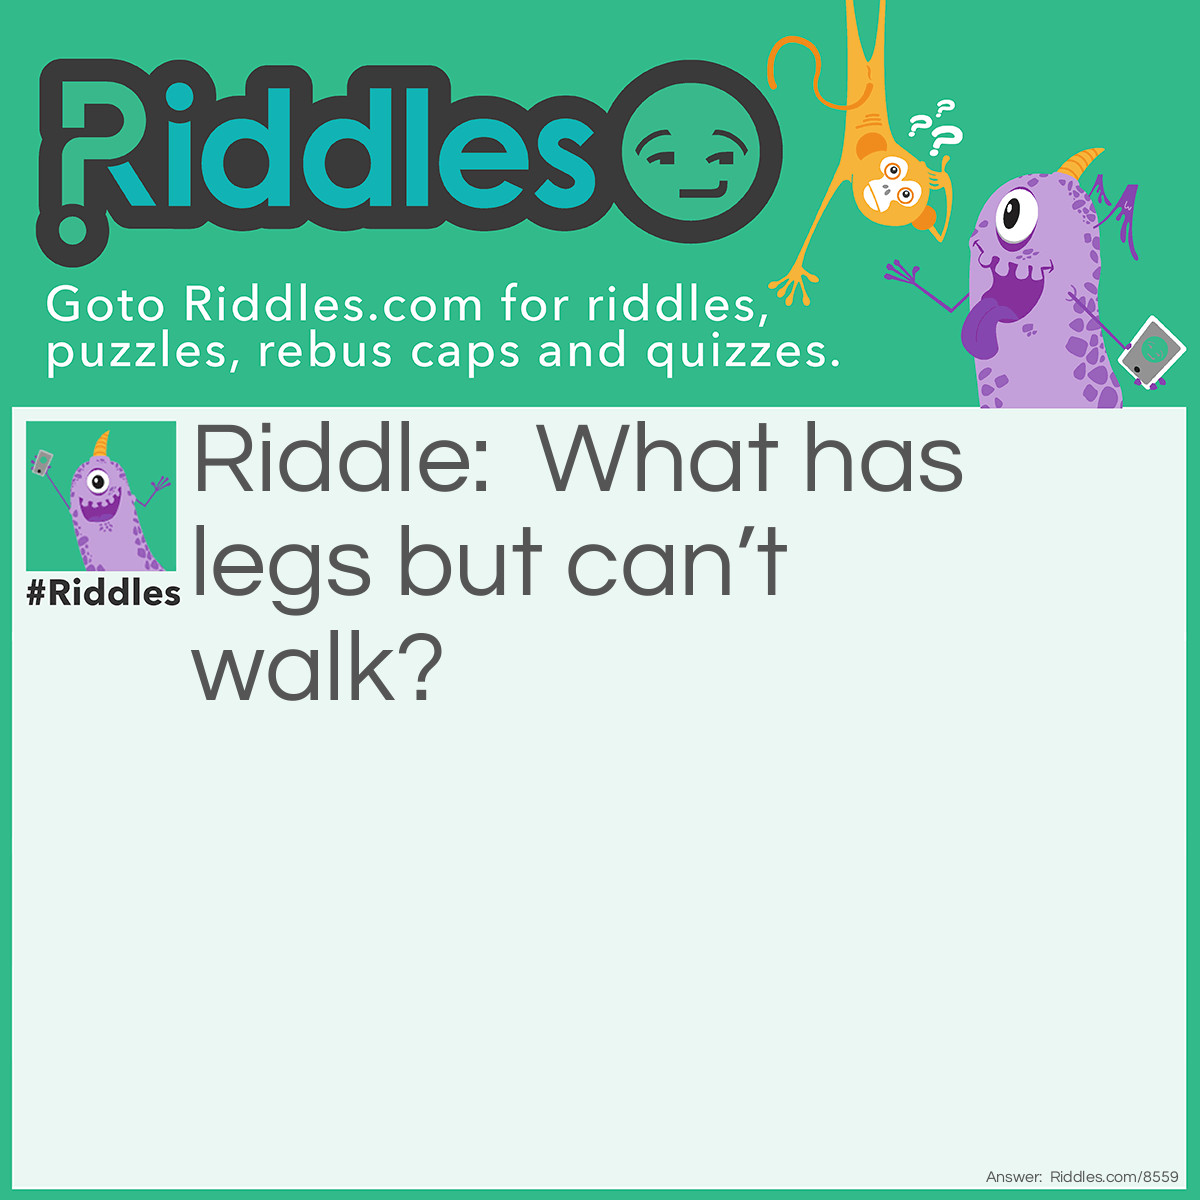 Riddle: What has legs but can't walk? Answer: A table and a chair